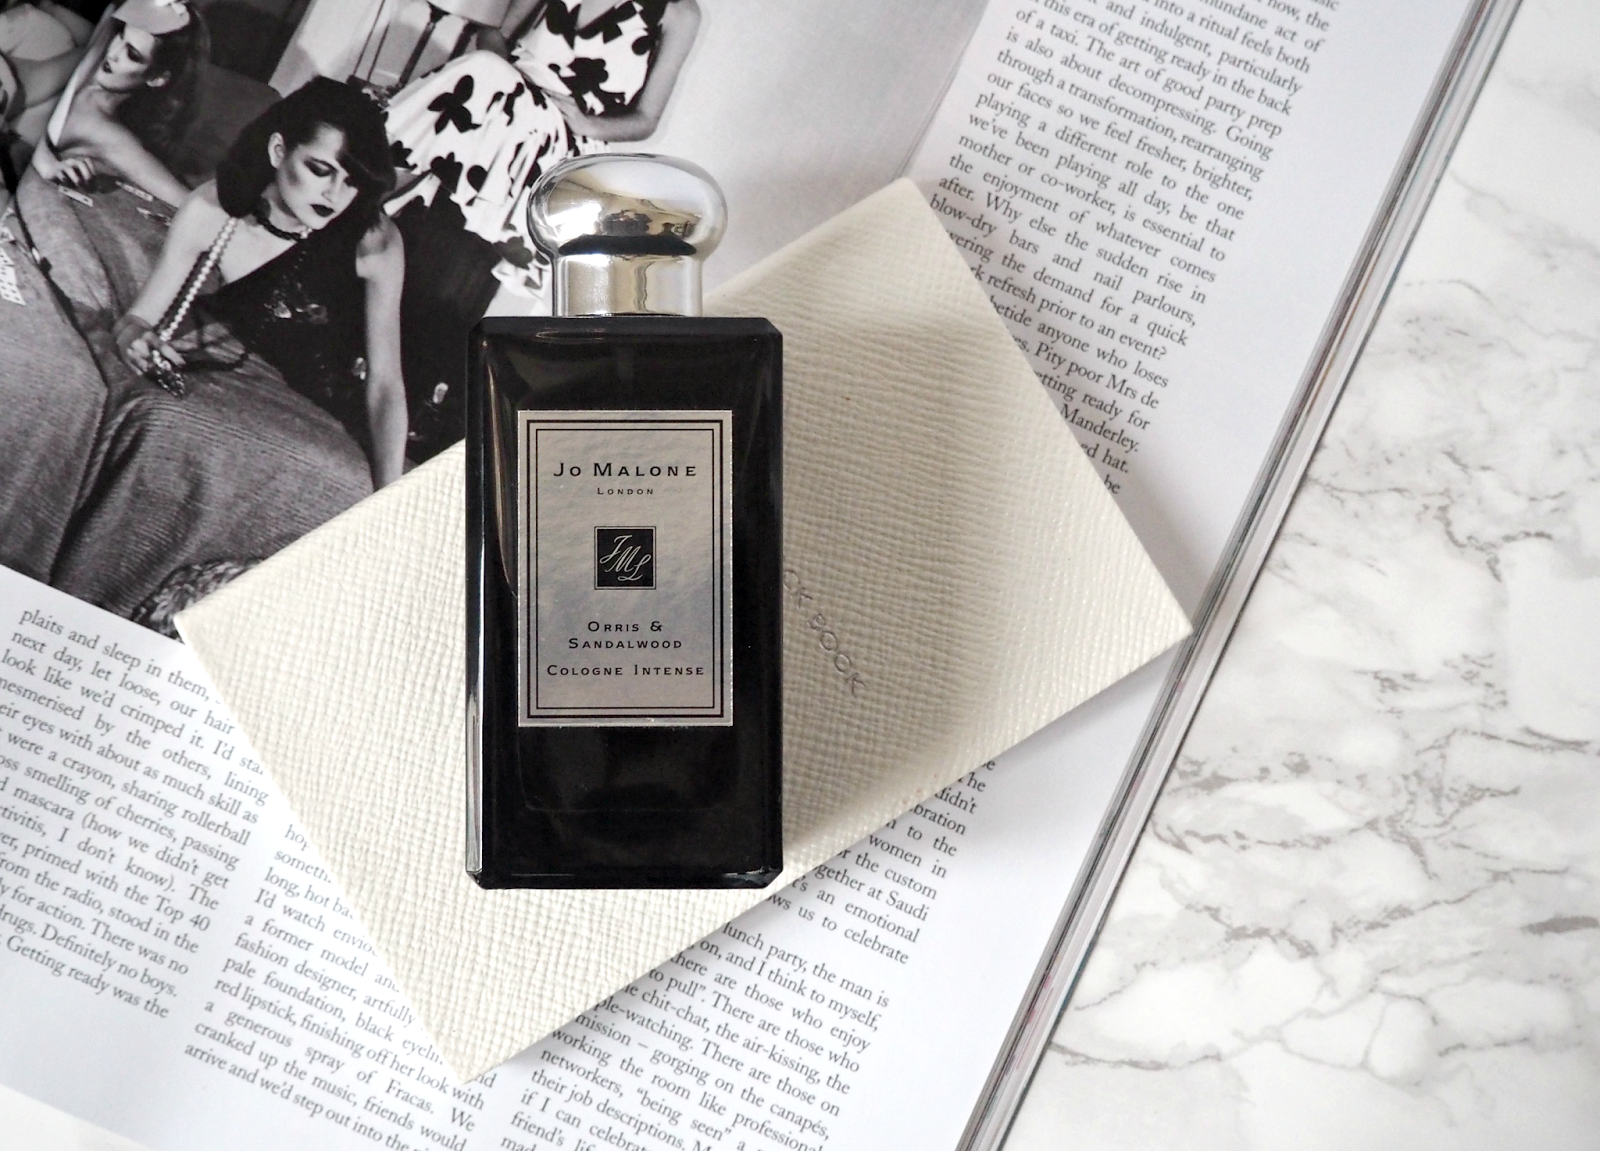 JO MALONE'S NEW SCENT IS LIKE PARMA VIOLETS FOR GROWN UPS: ORRIS & SANDALWOOD COLOGNE